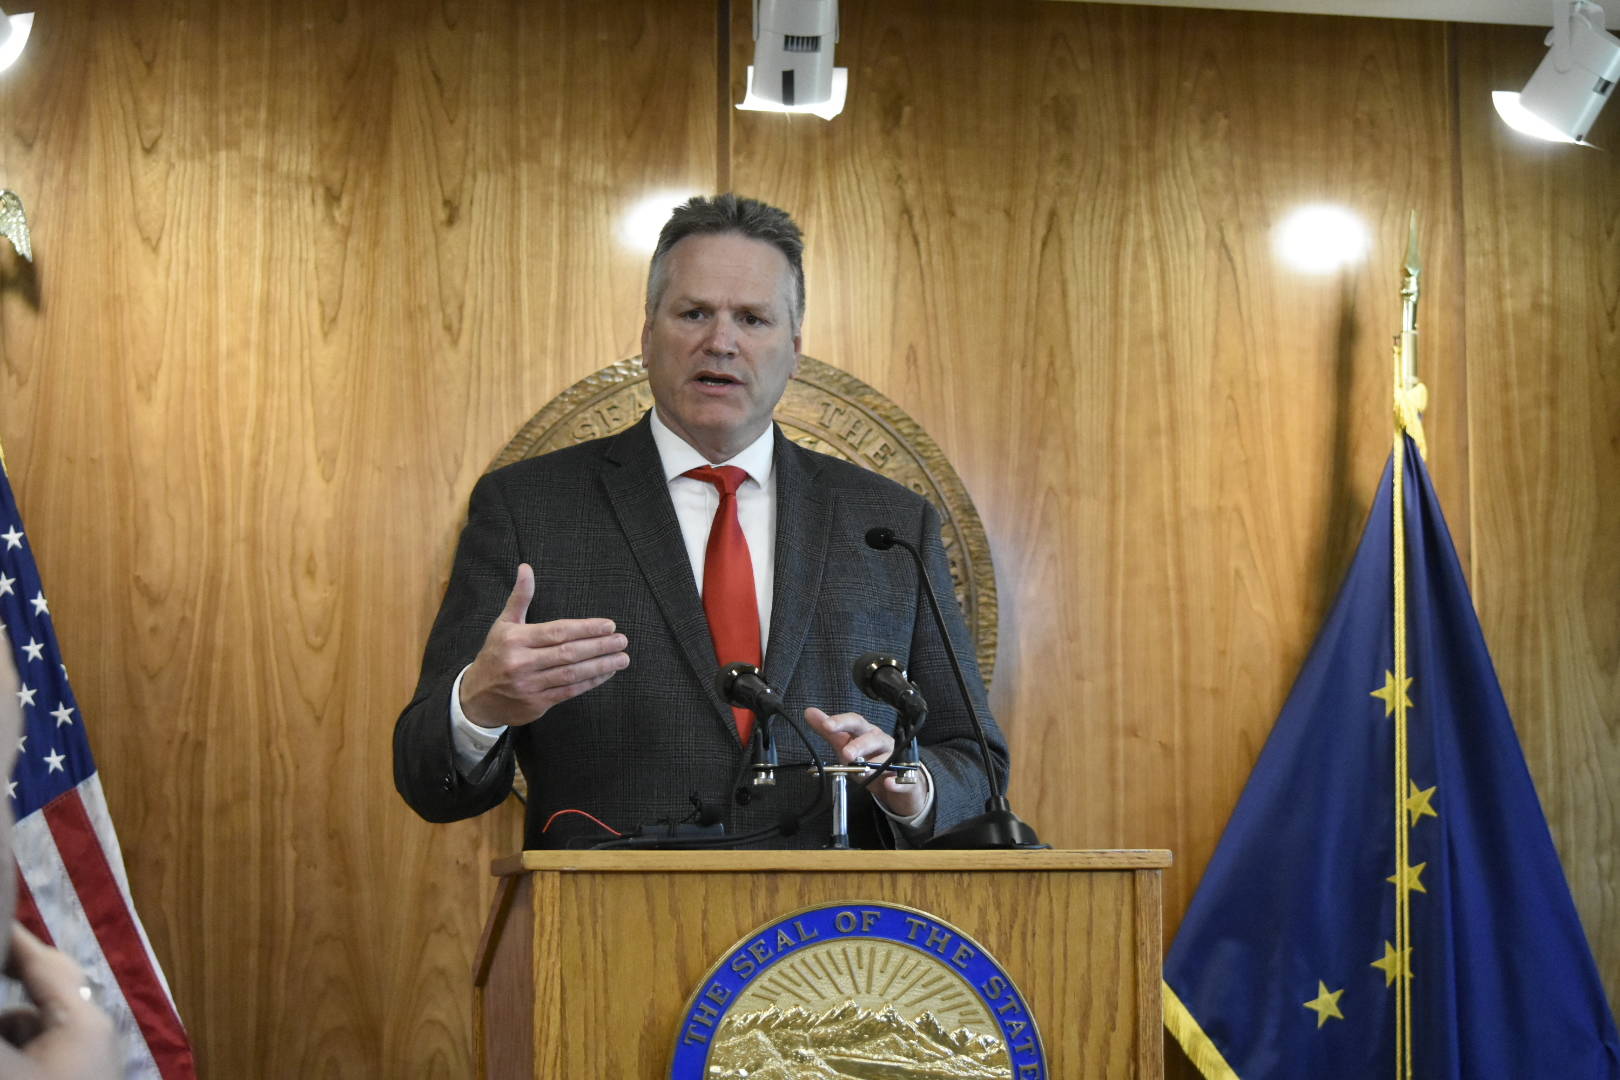 Gov. Mike Dunleavy held a press conference at the Alaska State Capitol on Thursday, June 17, 2021, to say he was ready to call lawmakers into yet another special session if they didn’t rectify by Friday issues with the budget passed earlier this week. (Peter Segall/Juneau Empire)